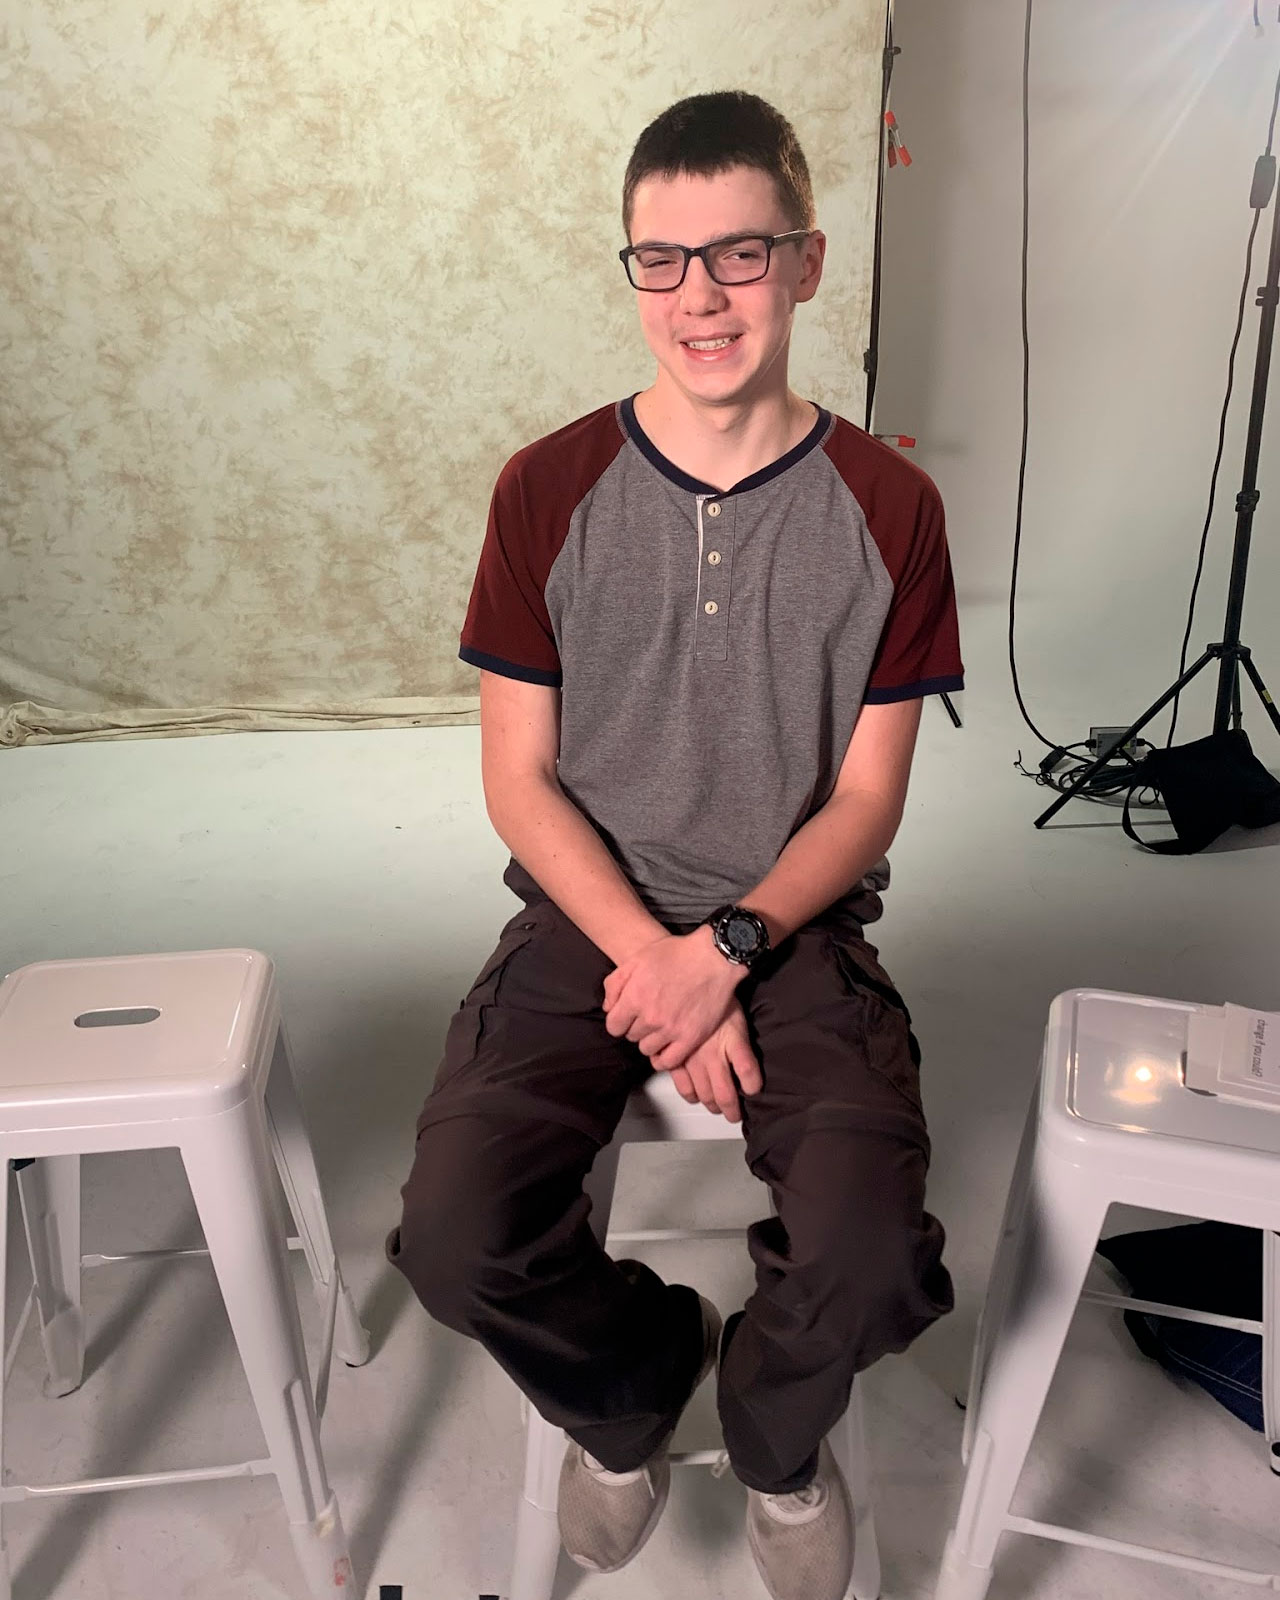 A photo of Curtis sitting on a stool looking into the camera and smiling.